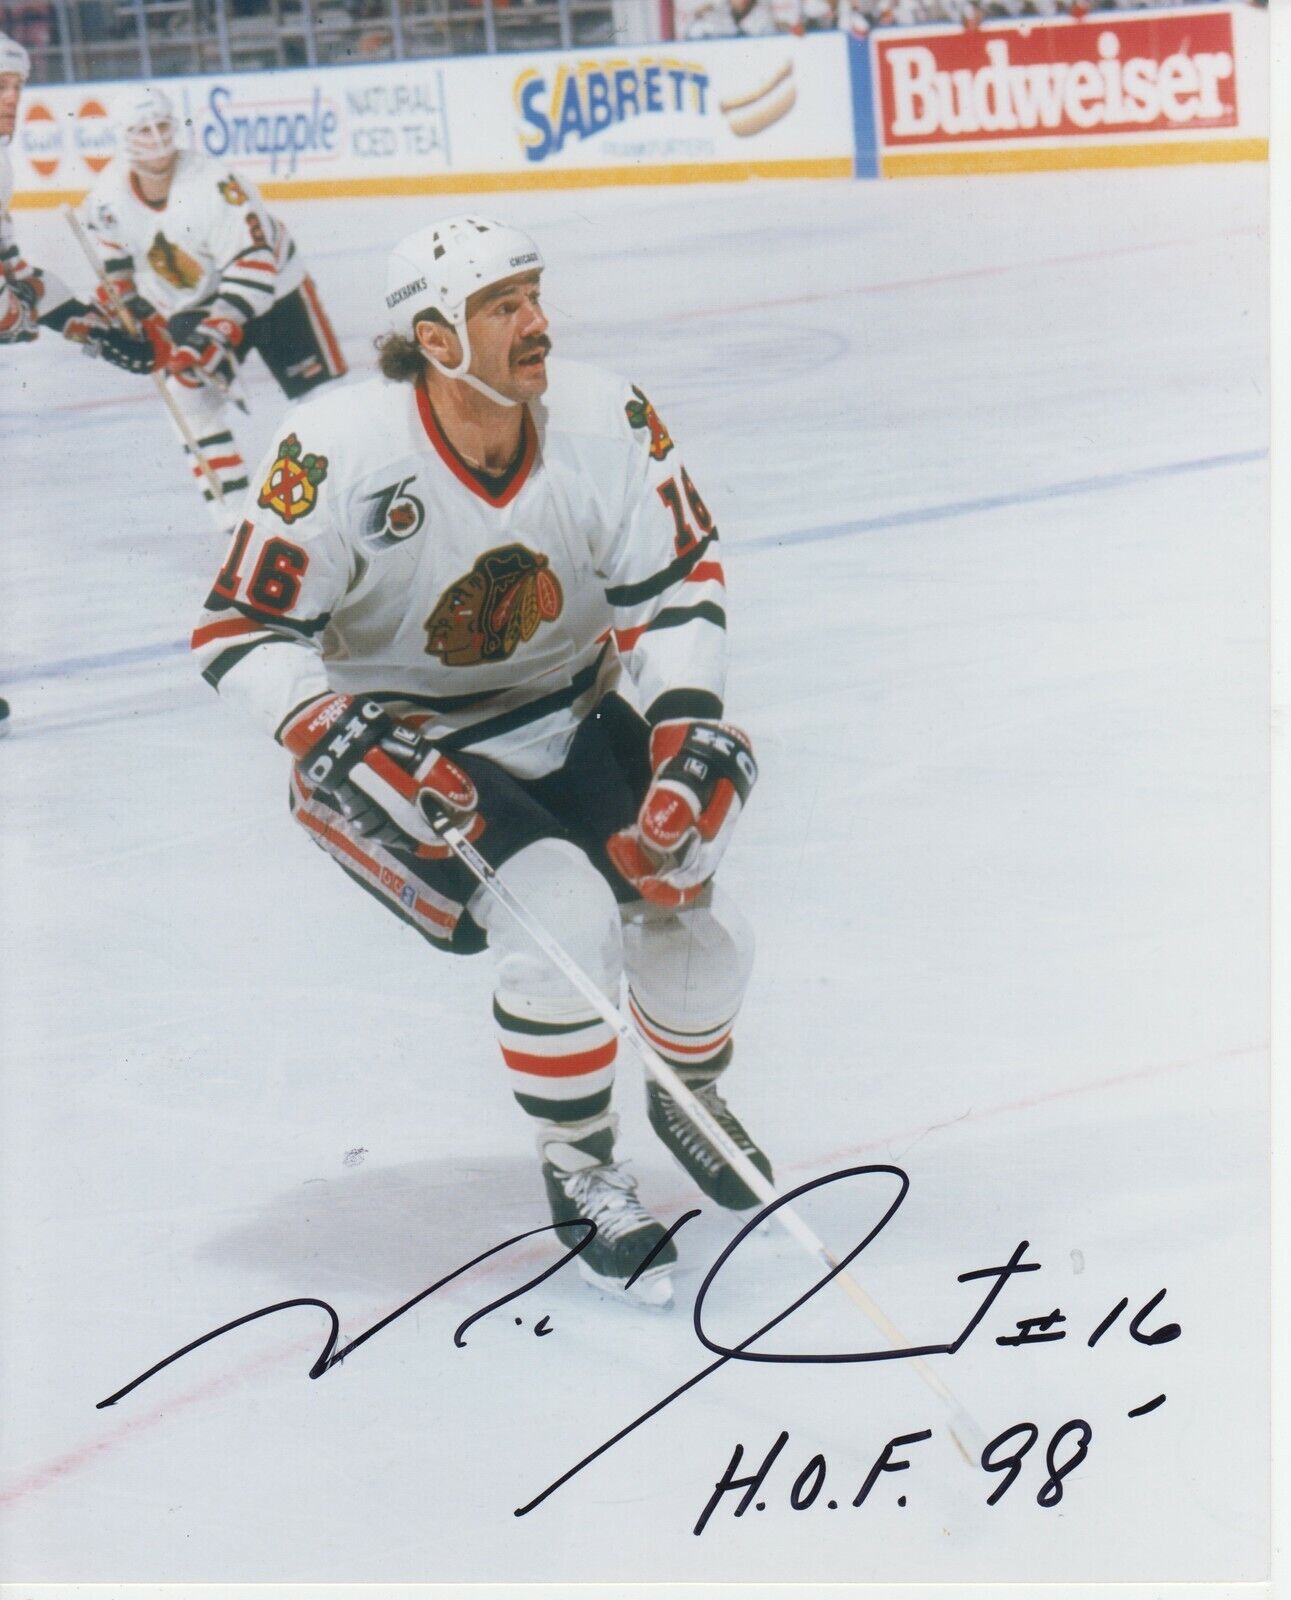 Michel Goulet With HOF 98 #0 8x10 Signed Photo Poster painting w/ COA Chicago Blackhawks -